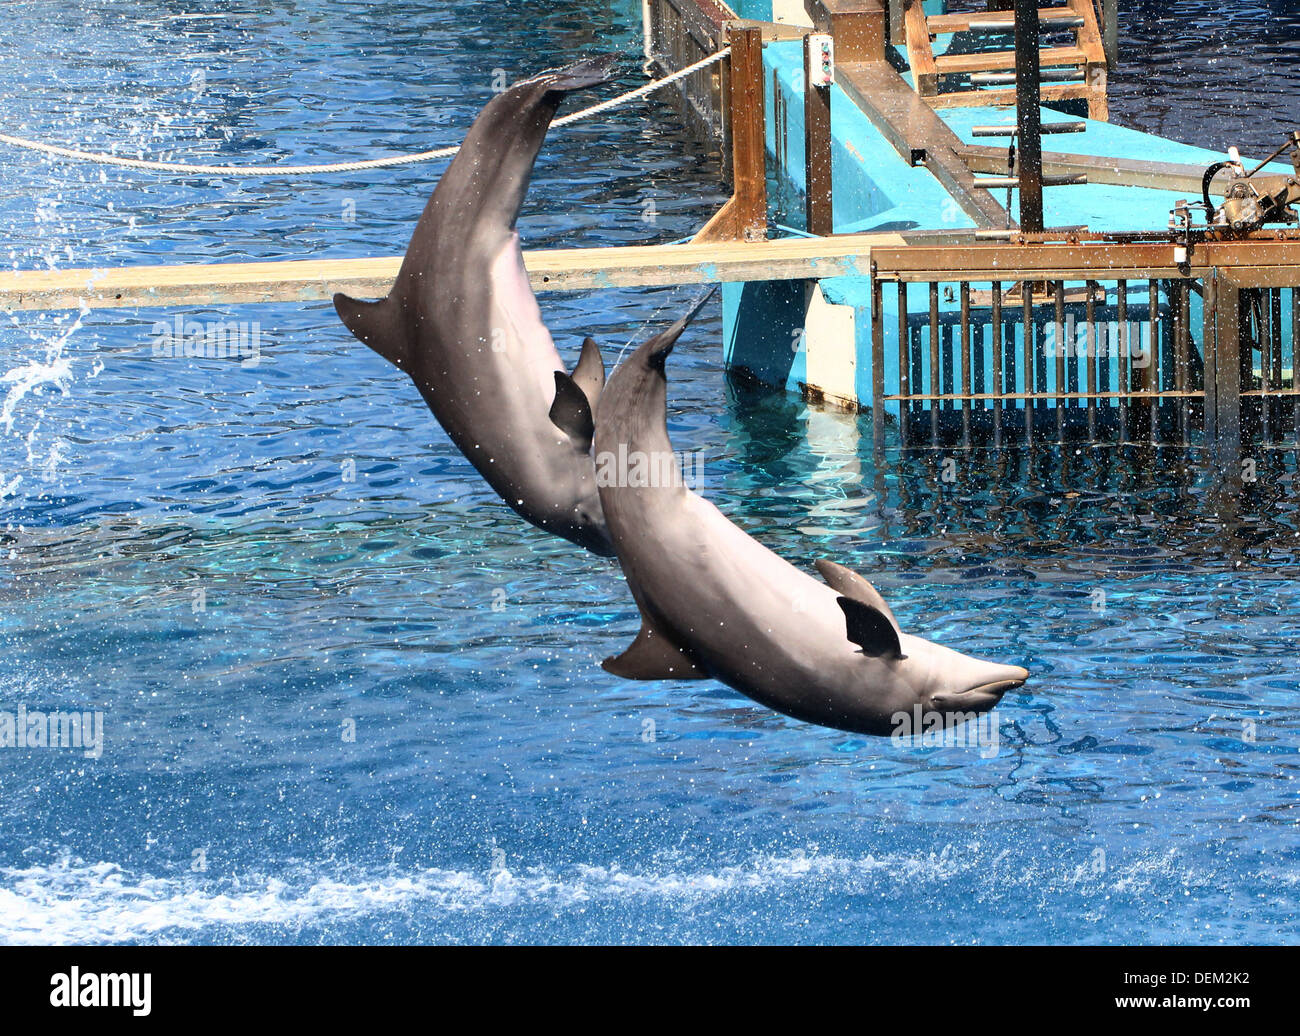 Bottle-nose dolphins doing jumps and somersaults at the Oceanografic Aquarium Marine Park & Zoo in Valencia, Spain Stock Photo